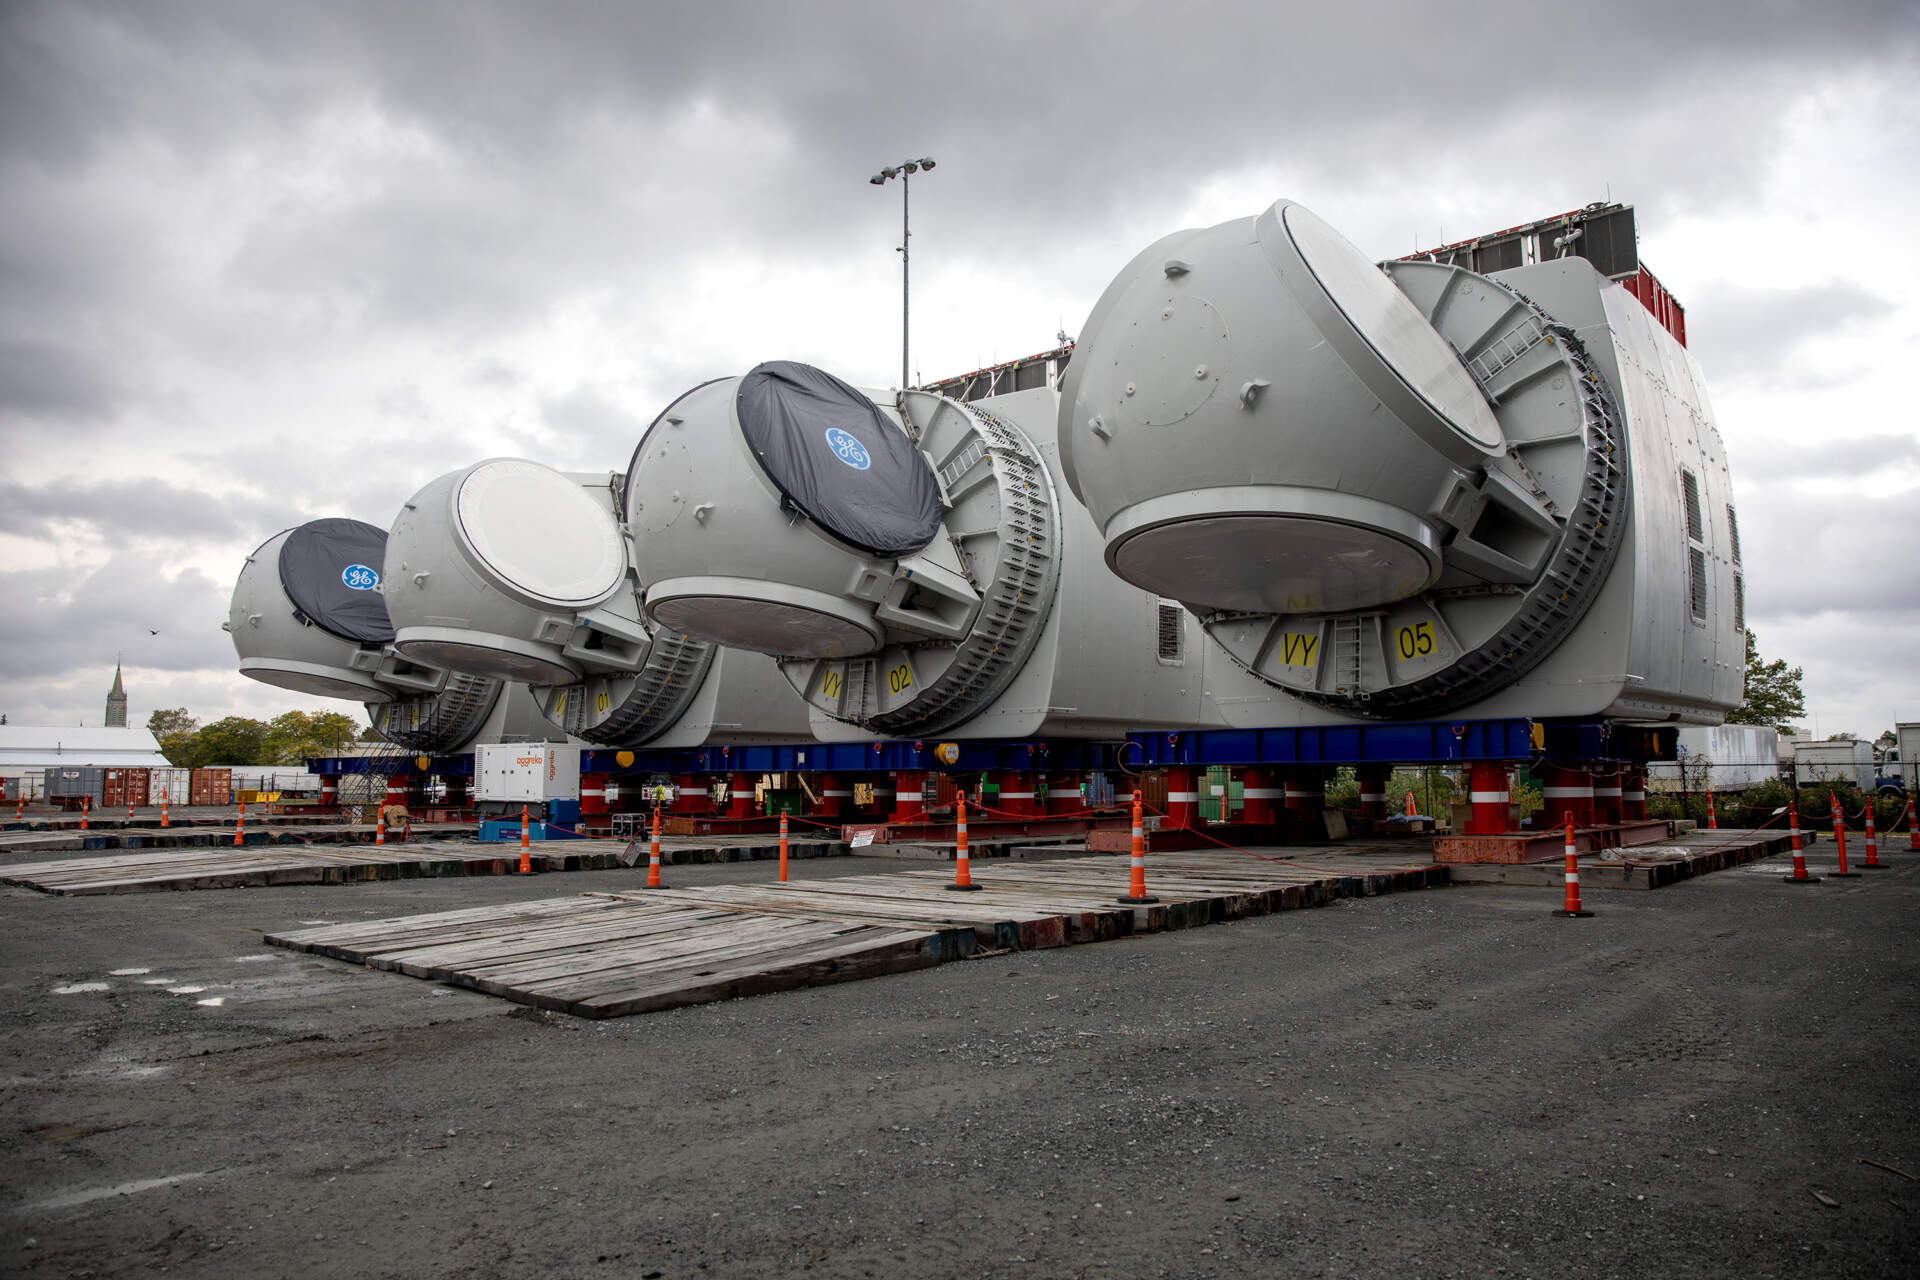 Four wind turbine nacelles wait at New Bedford Marine Commerce Terminal, ready to be shipped to their destinations off Martha's Vineyard. (Robin Lubbock/WBUR)